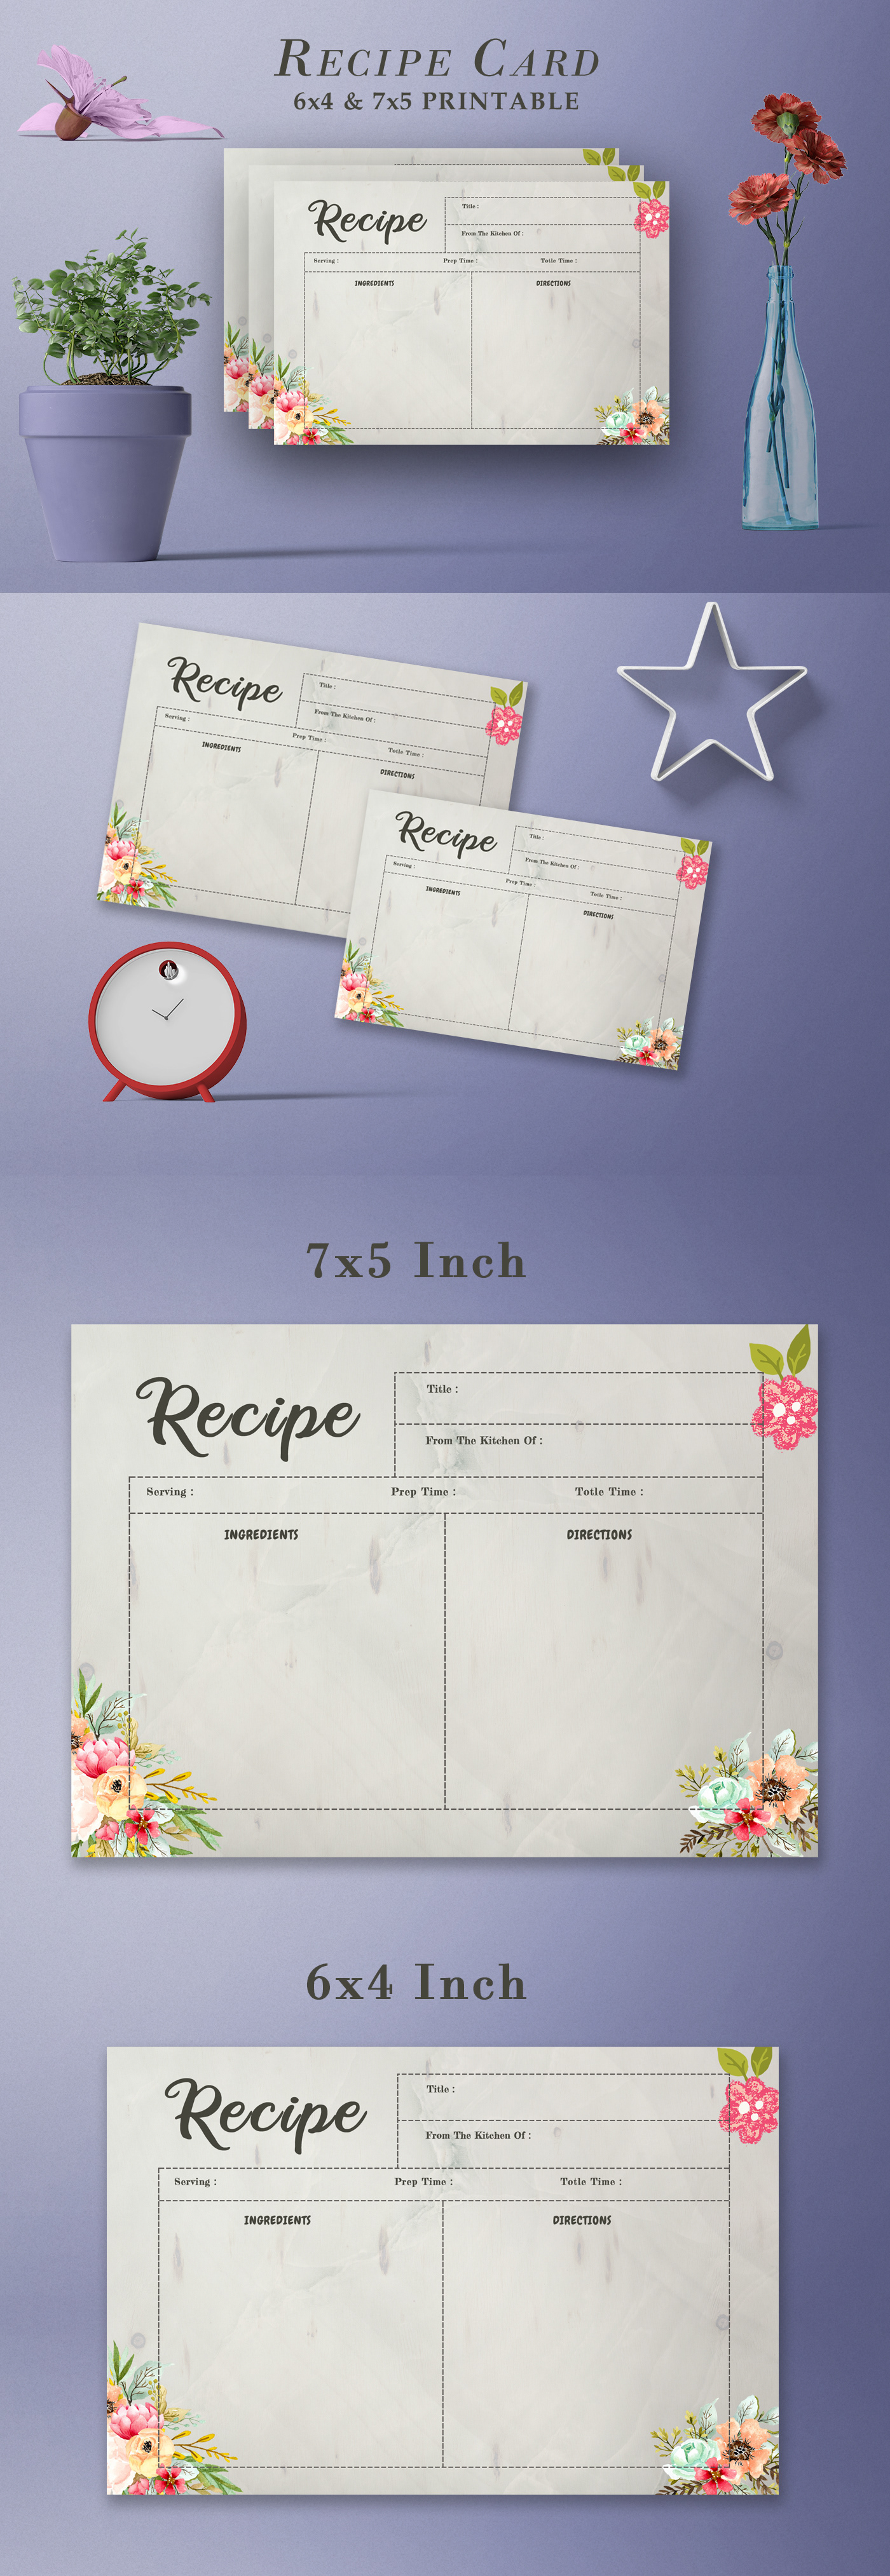 Free Recipe Card Printable Template V18 is a modern and lovely illustrative recipe template for you.